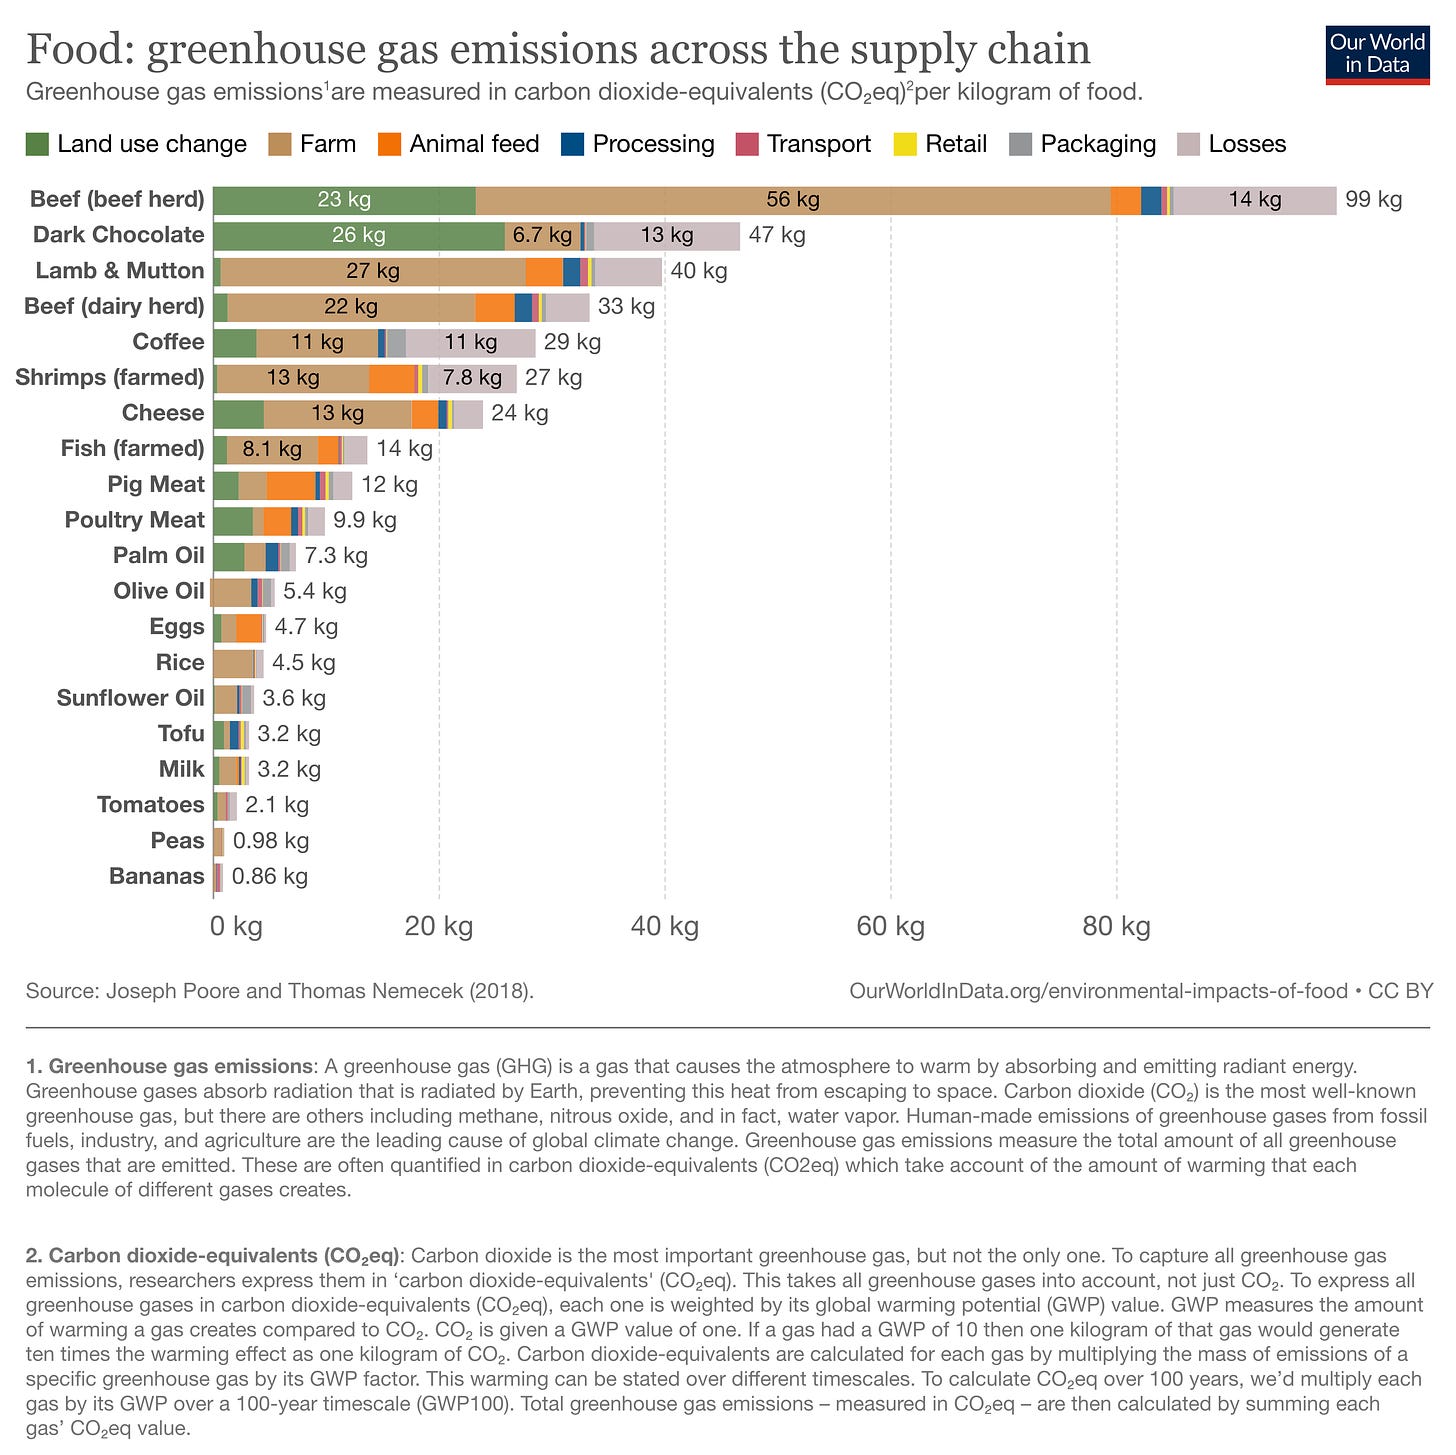 A chart showing the greenhouse gas emissions across the supply chain, including land use change, farm, animal feed, processing, transport, retail, packaging and losses. The chart illustrates that beef has the highest greenhouse gas emissions, with 99kg total (the majority coming from farm), while bananas have the lease greenhouse gas emissions at 0.86kg